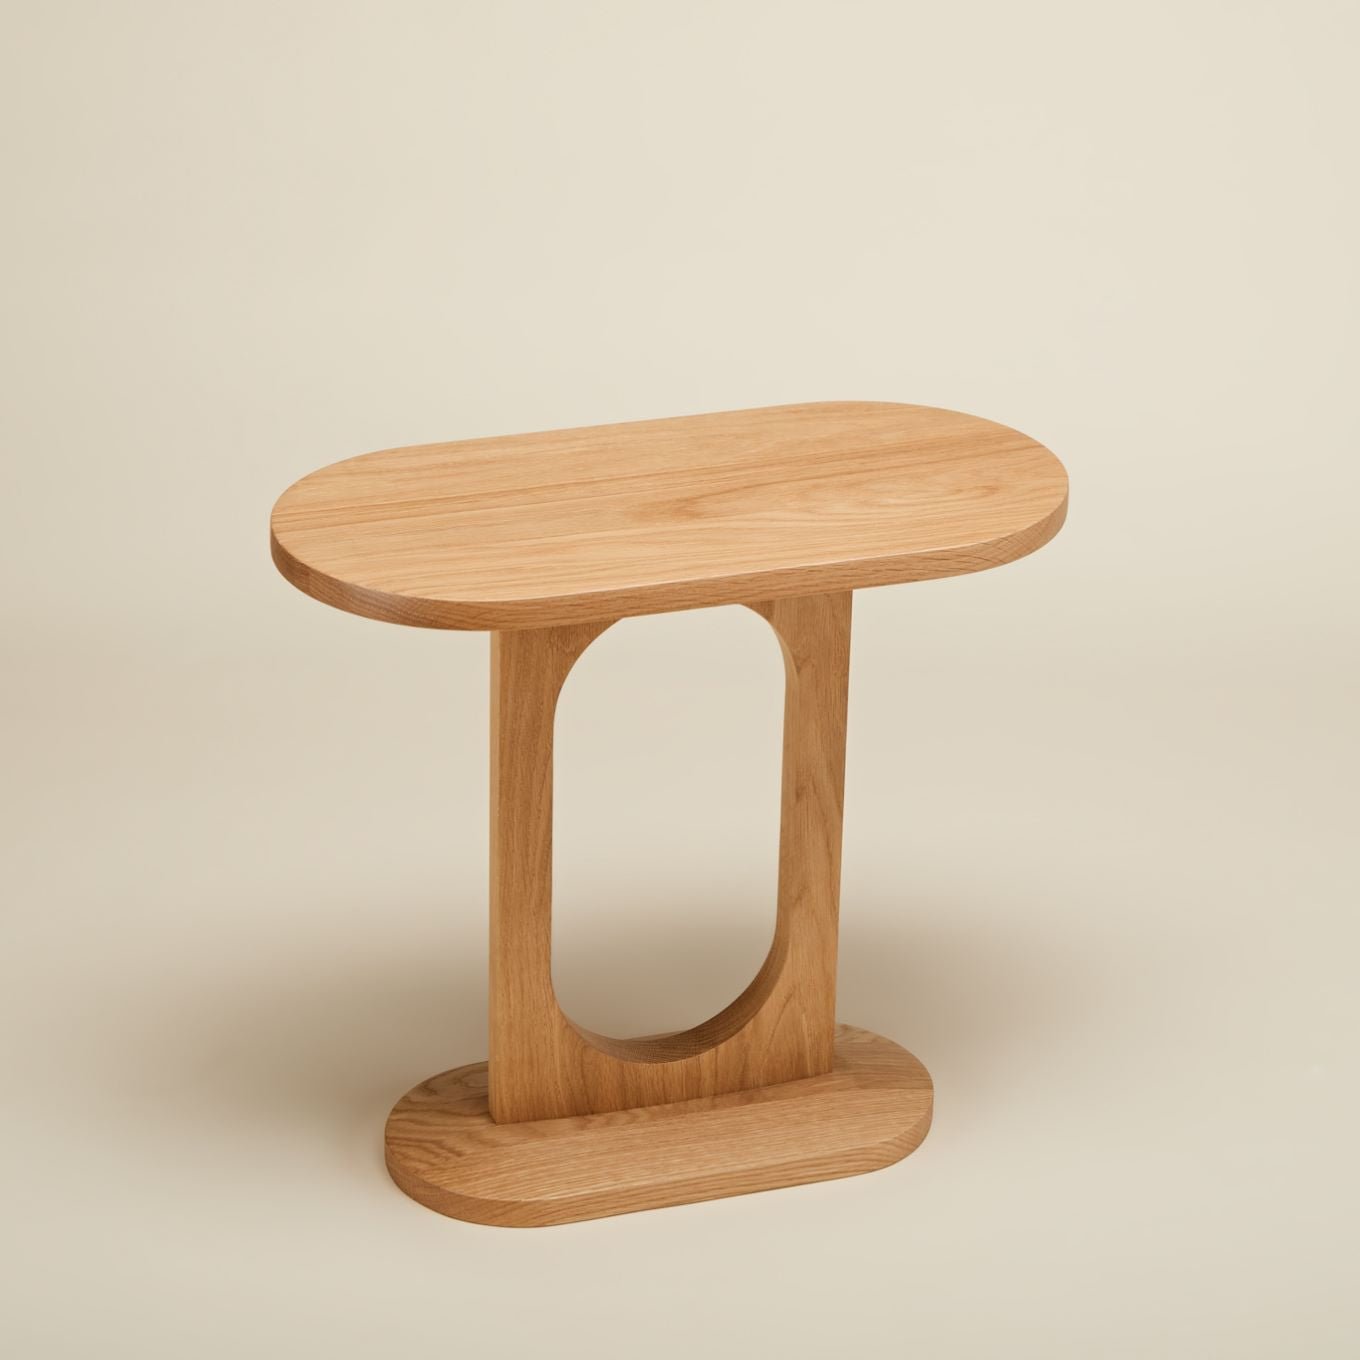 Ethos Plus side table by E9 Design in solid American white oak timber